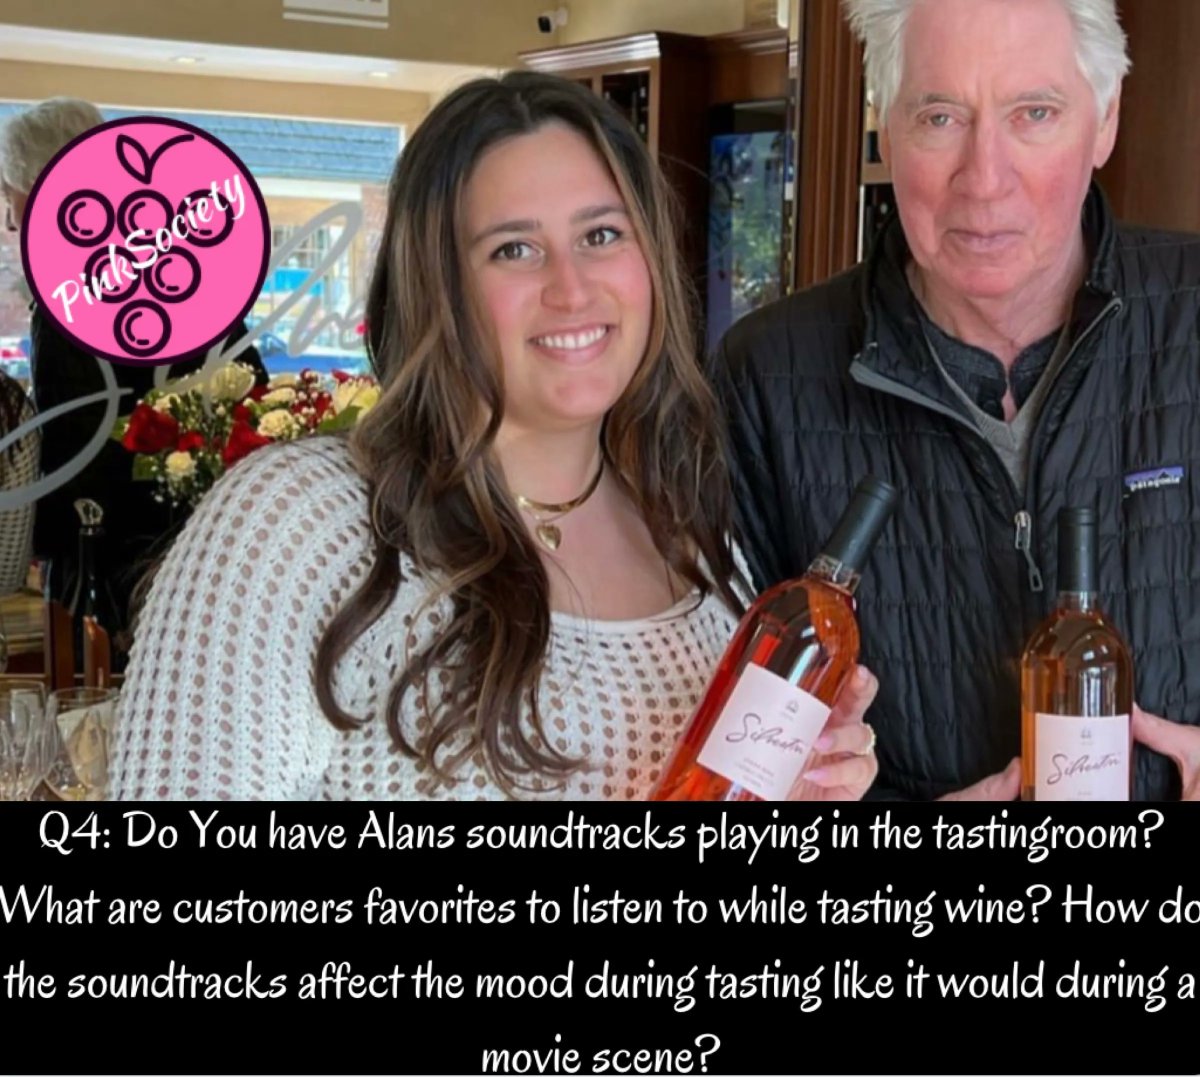 Q4: Do You have Alan’s soundtracks playing in the tastingroom? What are customer’s favorites to listen to while tasting wine? How do the soundtracks affect the mood during tasting like it would during a movie scene? #PinkSociety @silvestriwine @jflorez @_drazzari @boozychef